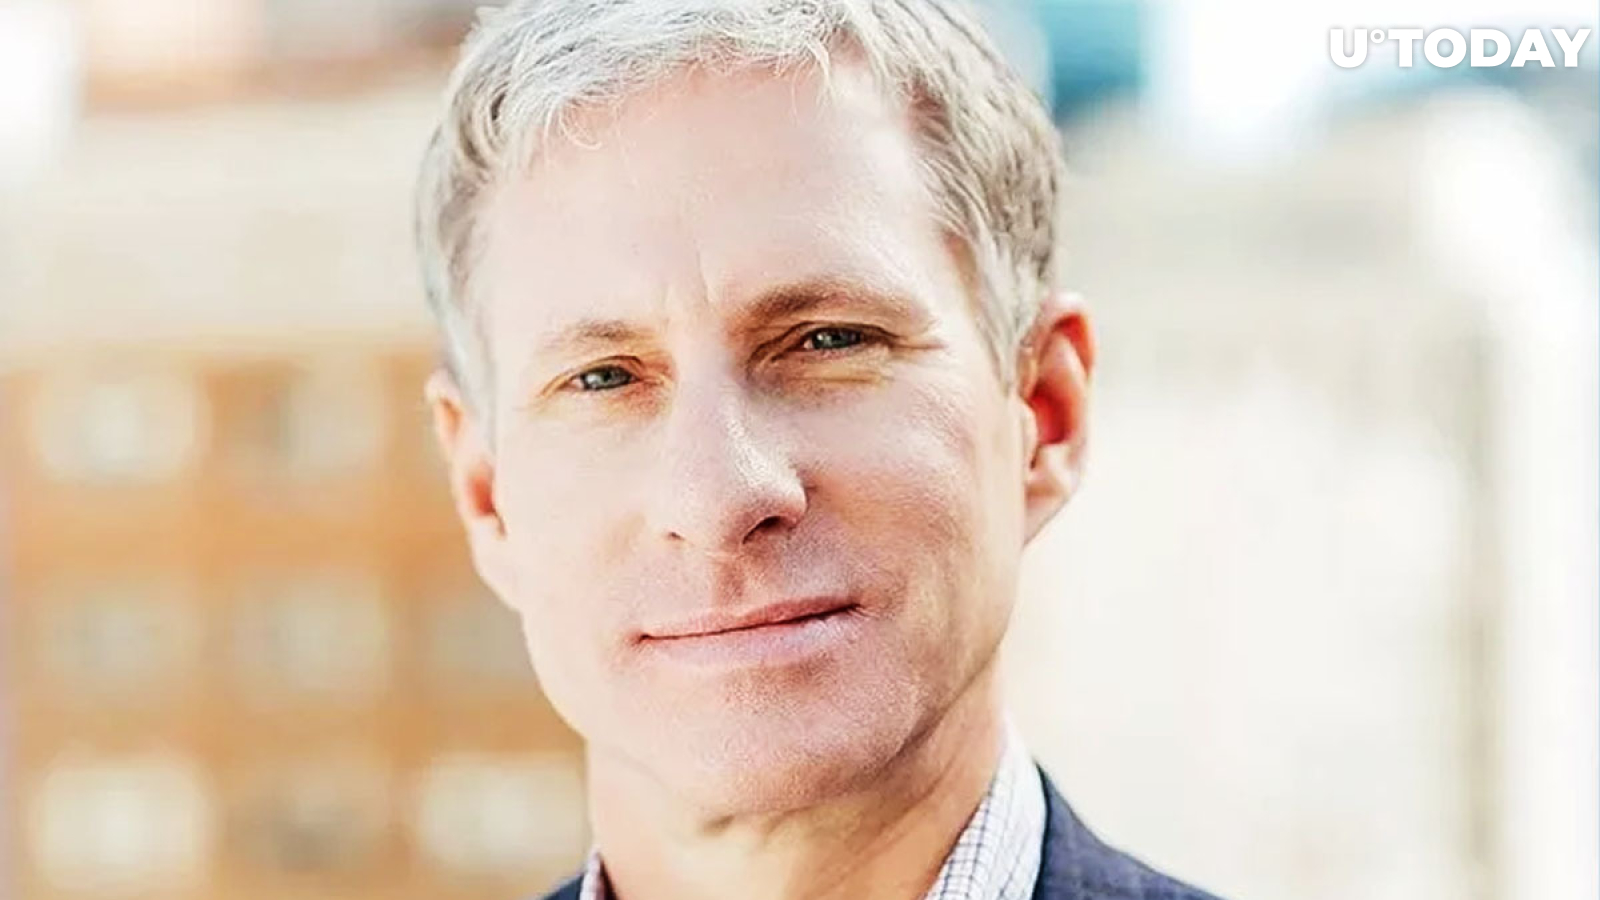 Ripple Co-Founder Chris Larsen Moves 75 Mln XRP to His Other Wallet